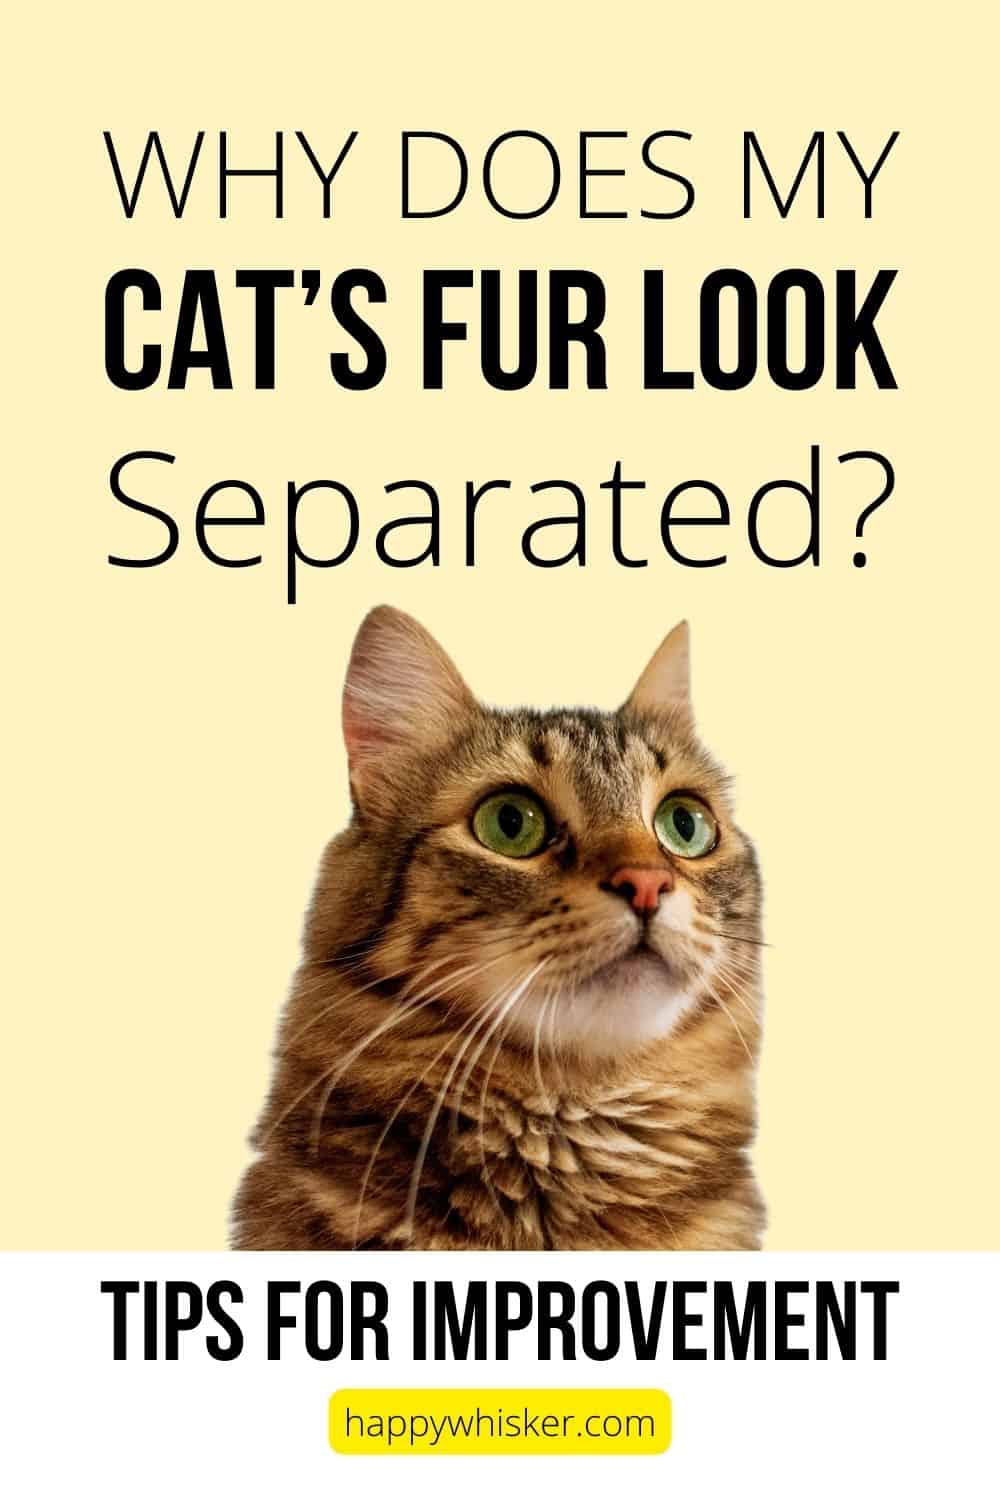 Why Does My Cat’s Fur Look Separated Tips For Improvement Pinterest